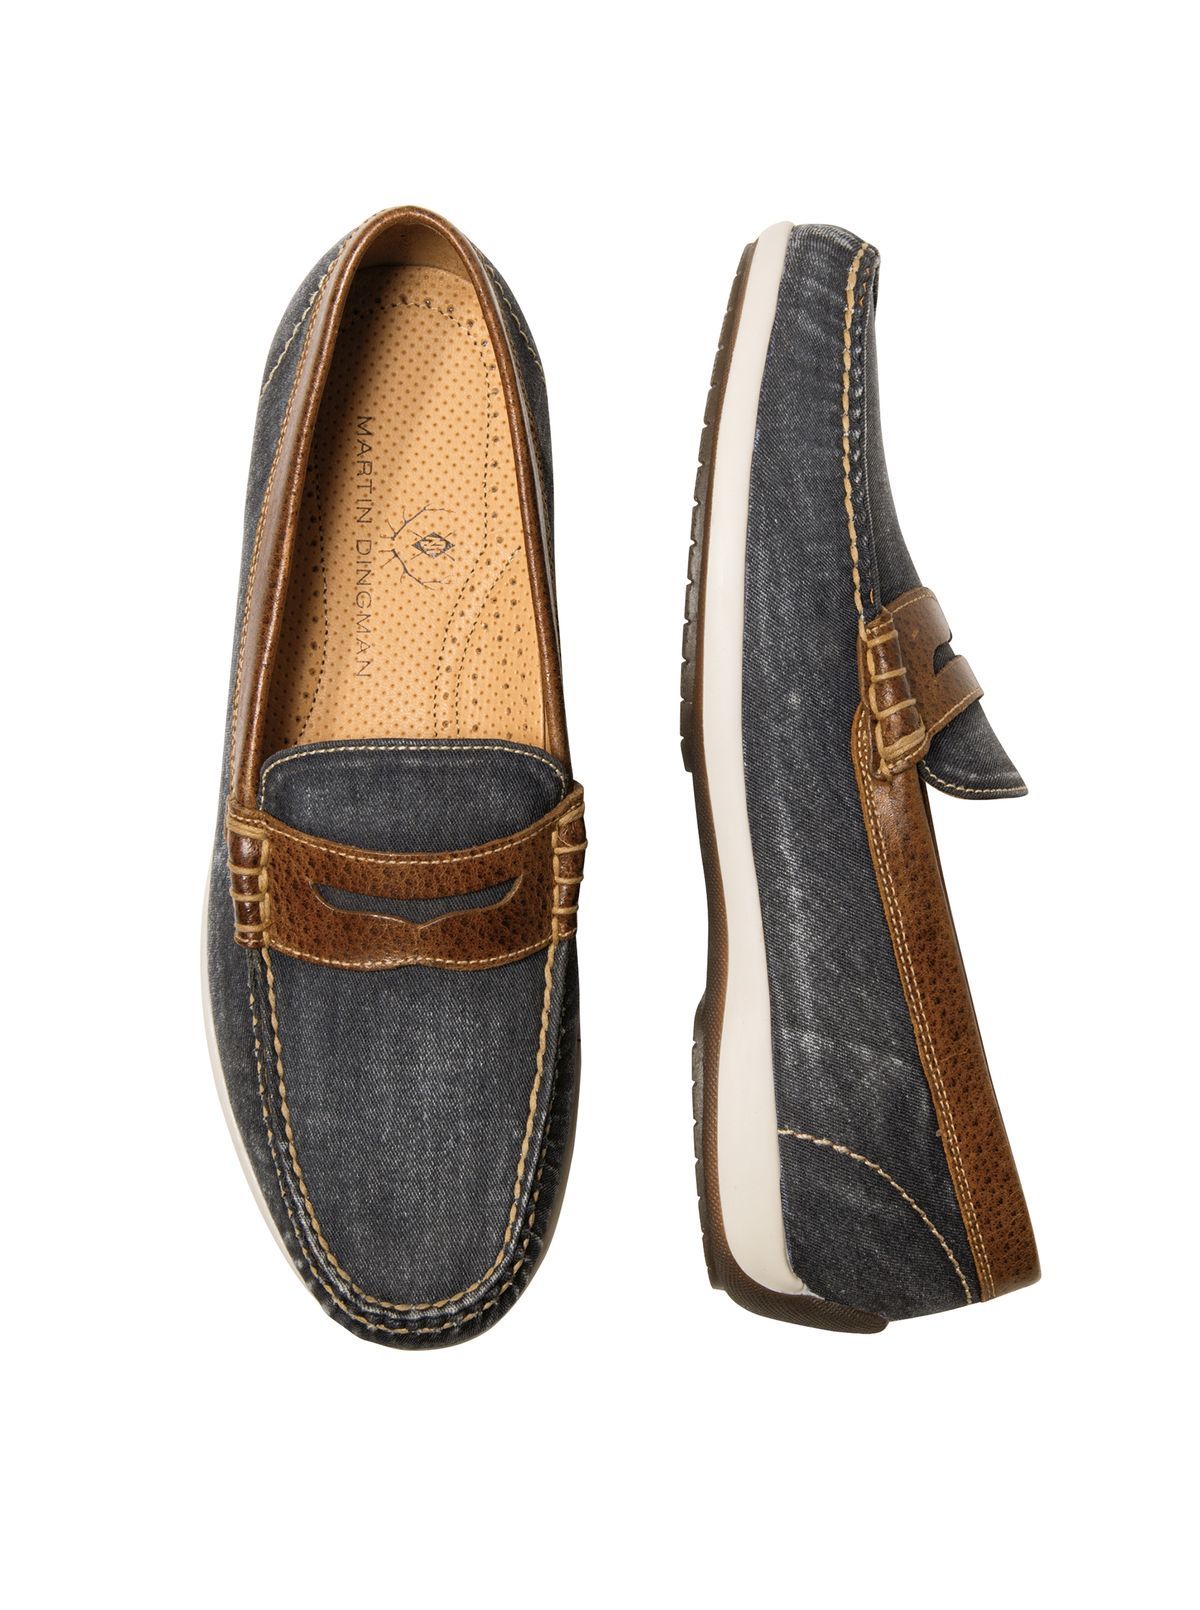 Seaside Penny Loafers from Martin Dingman